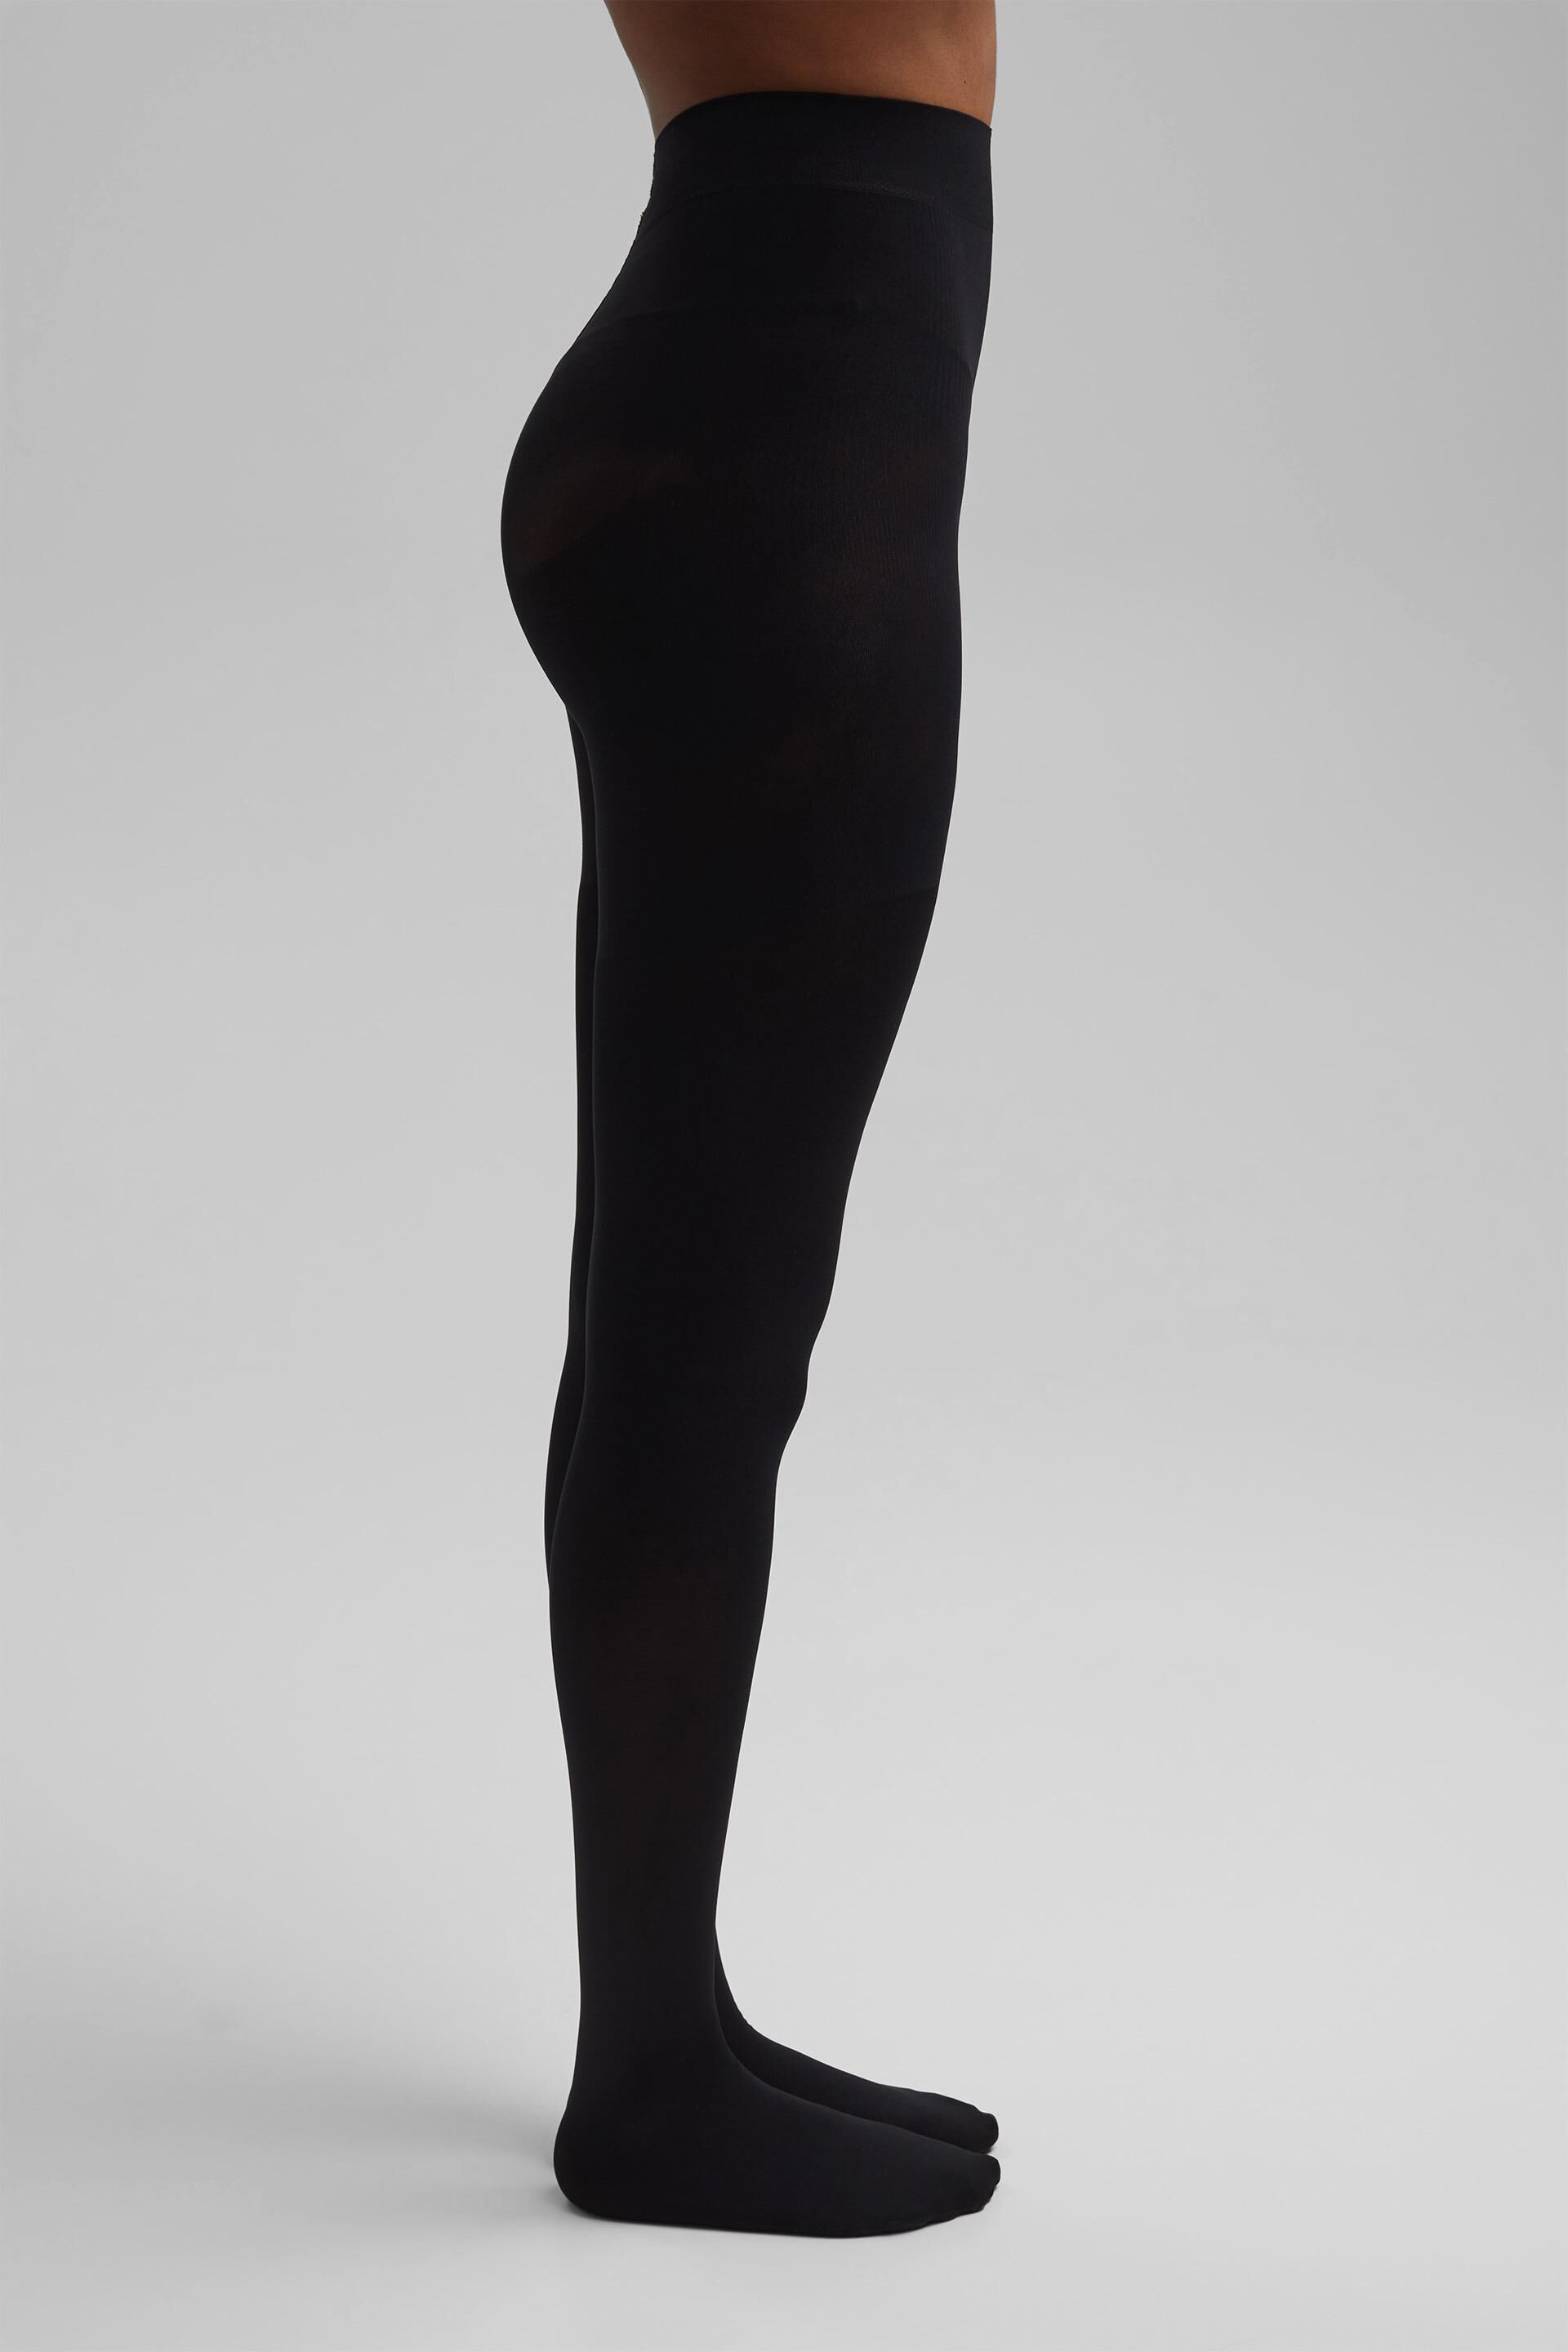 ESPRIT - Tights with a shaping effect, 80 den at our online shop